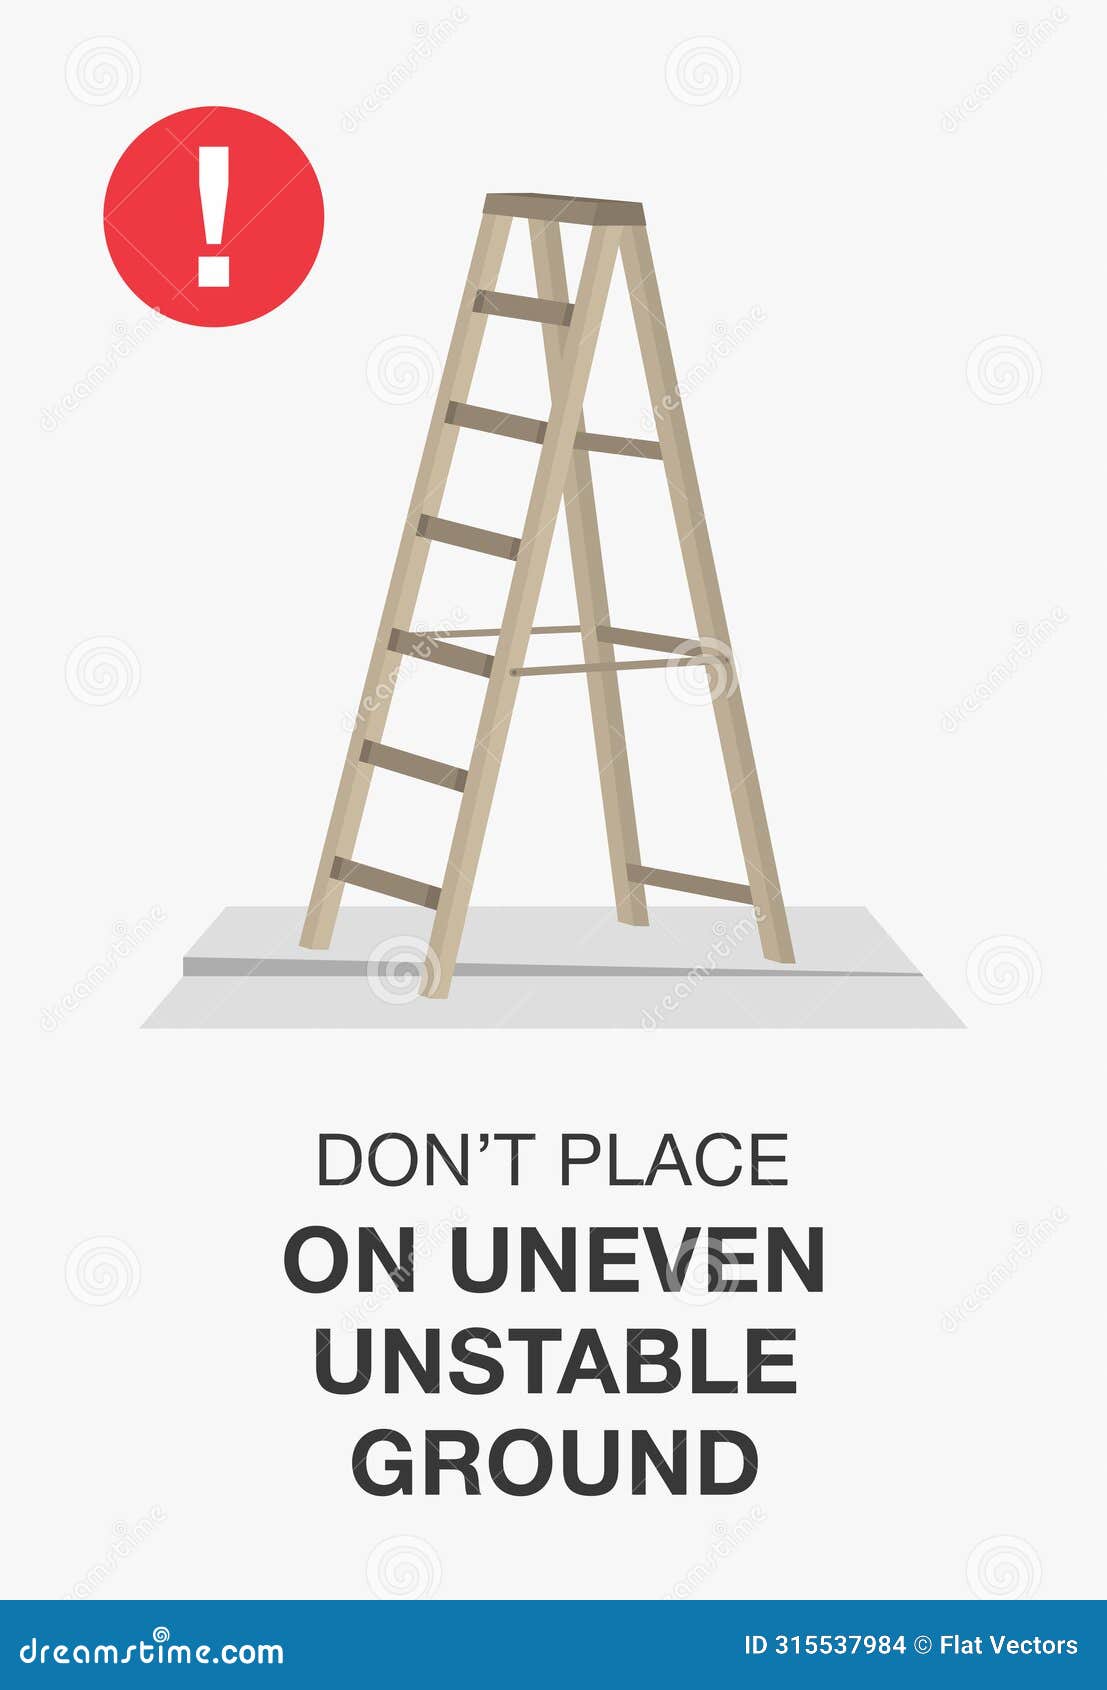 work safety rules. don't place ladder on uneven unstable ground poster .